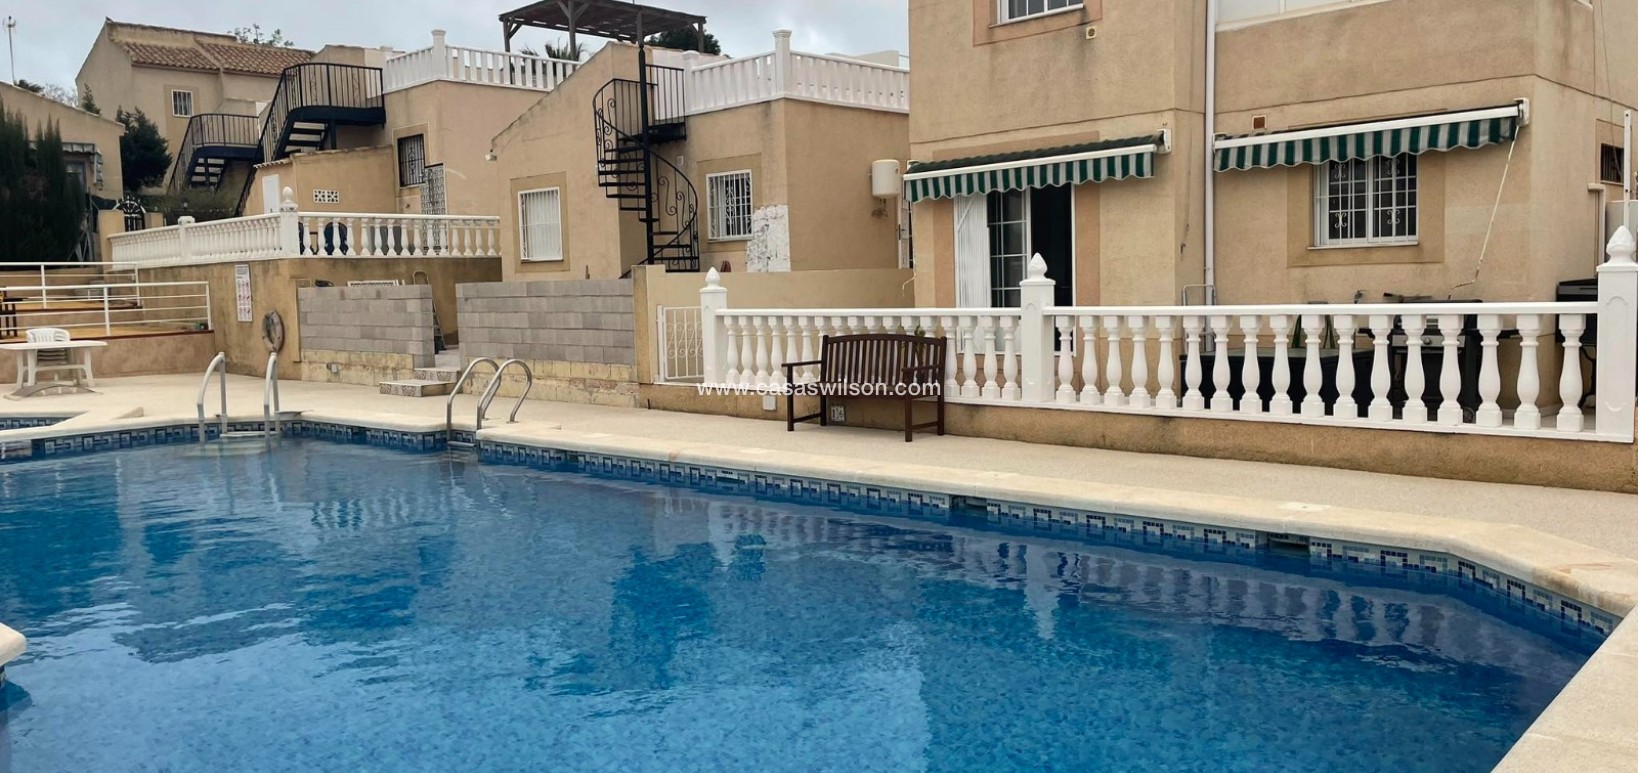 Sale - House - Townhouse - Torrevieja - Los Balcones